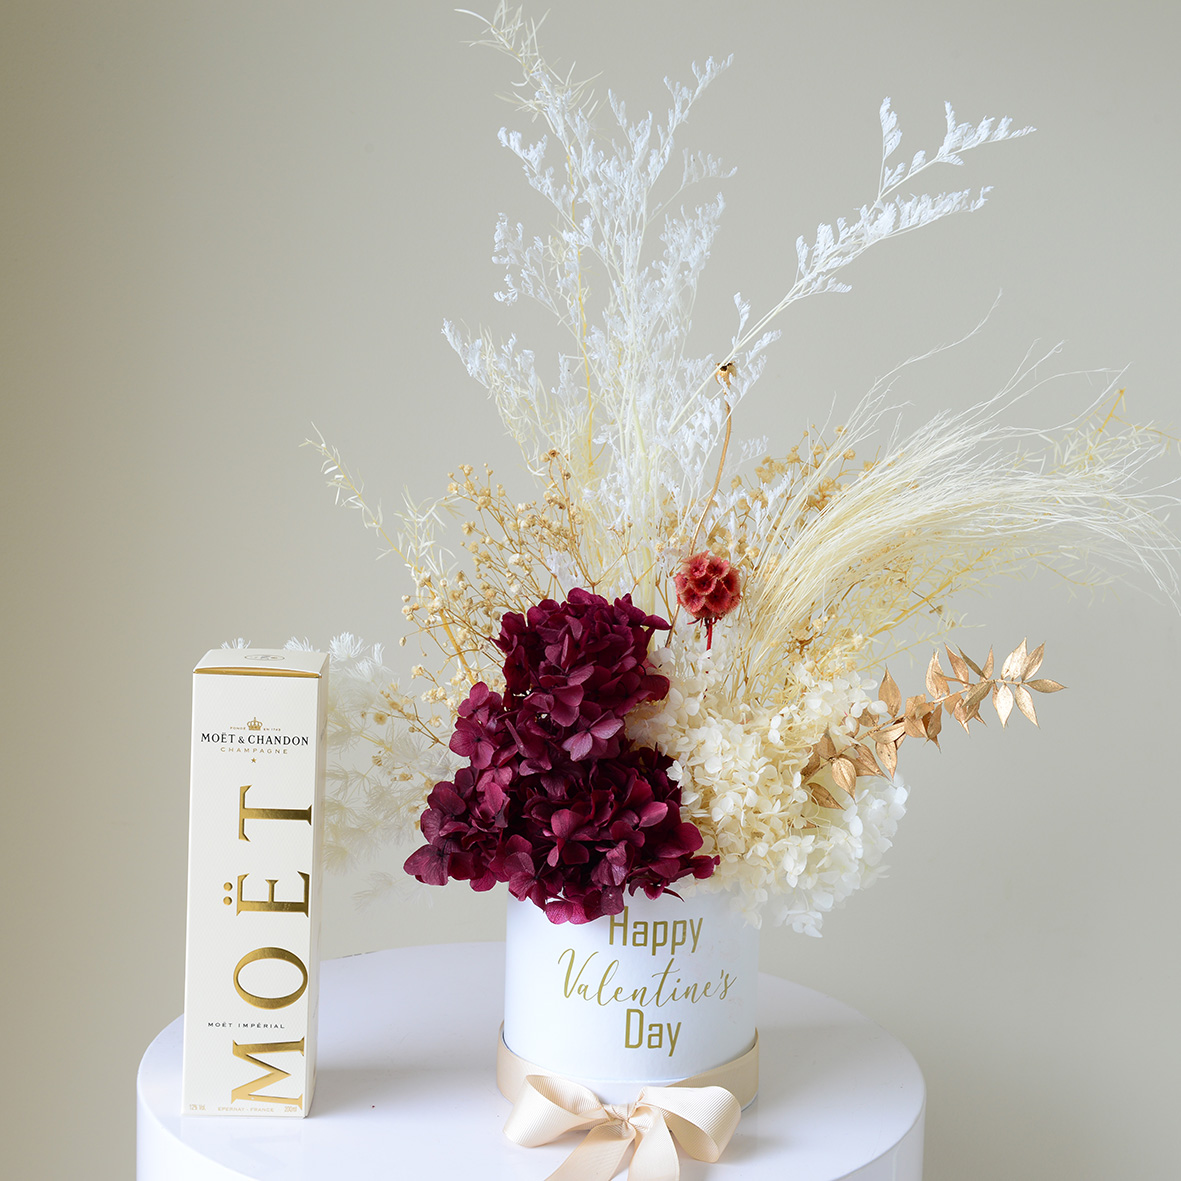 Dried Flower Arrangements With Roses - Sydney - LOVE101